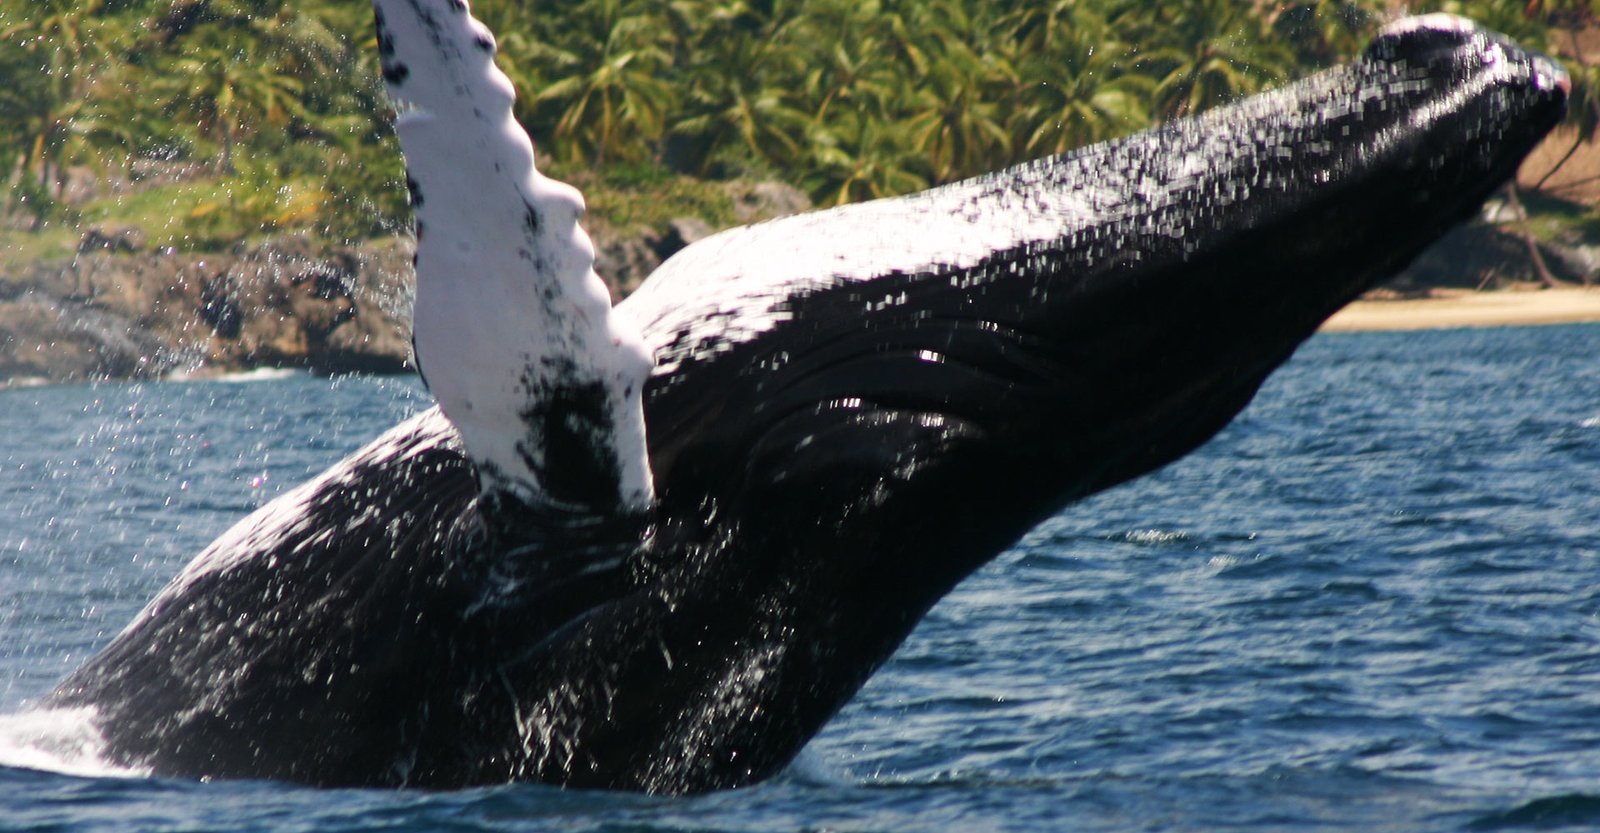 One of the Best Excursions from Las Terrenas : Humpback Whale Watching Tour in Samana Bay Dominican Republic.